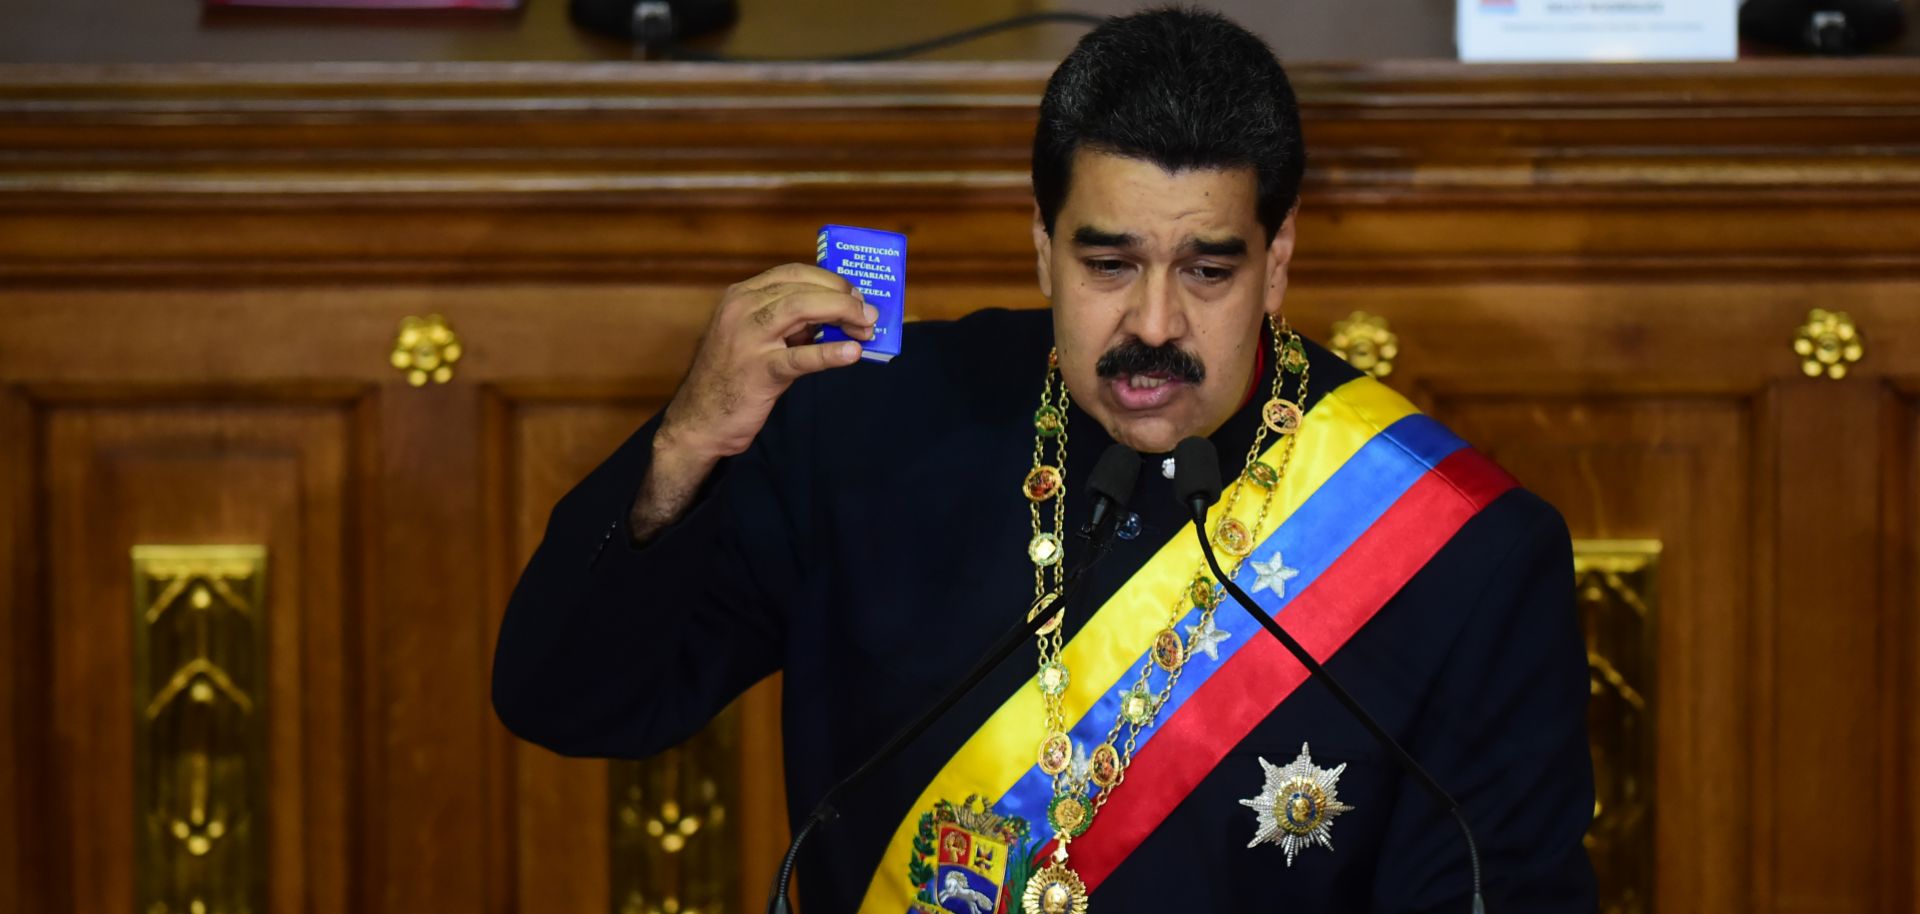 Negotiations to create the conditions that would allow President Nicolas Maduro to step down have stalled yet again.